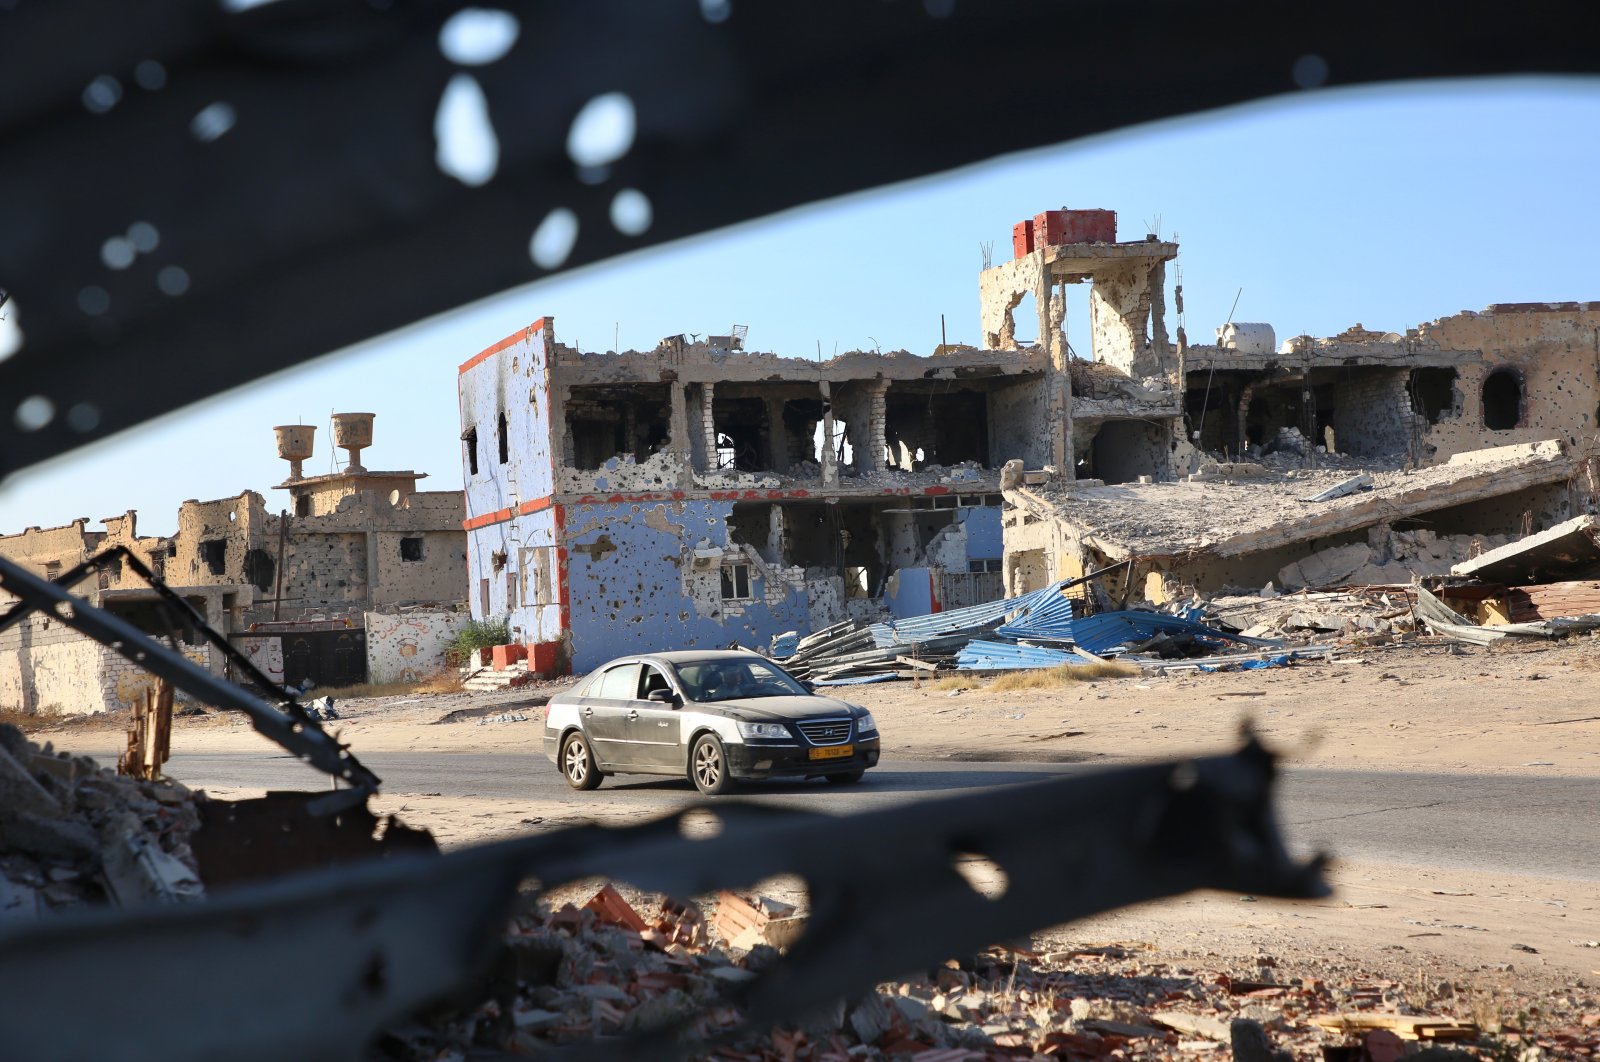 Although the capital province of Tripoli has been liberated from Haftar forces and its backers on June 4, the city still carries the damages left by the constant attacks, June 27, 2020. (AA)